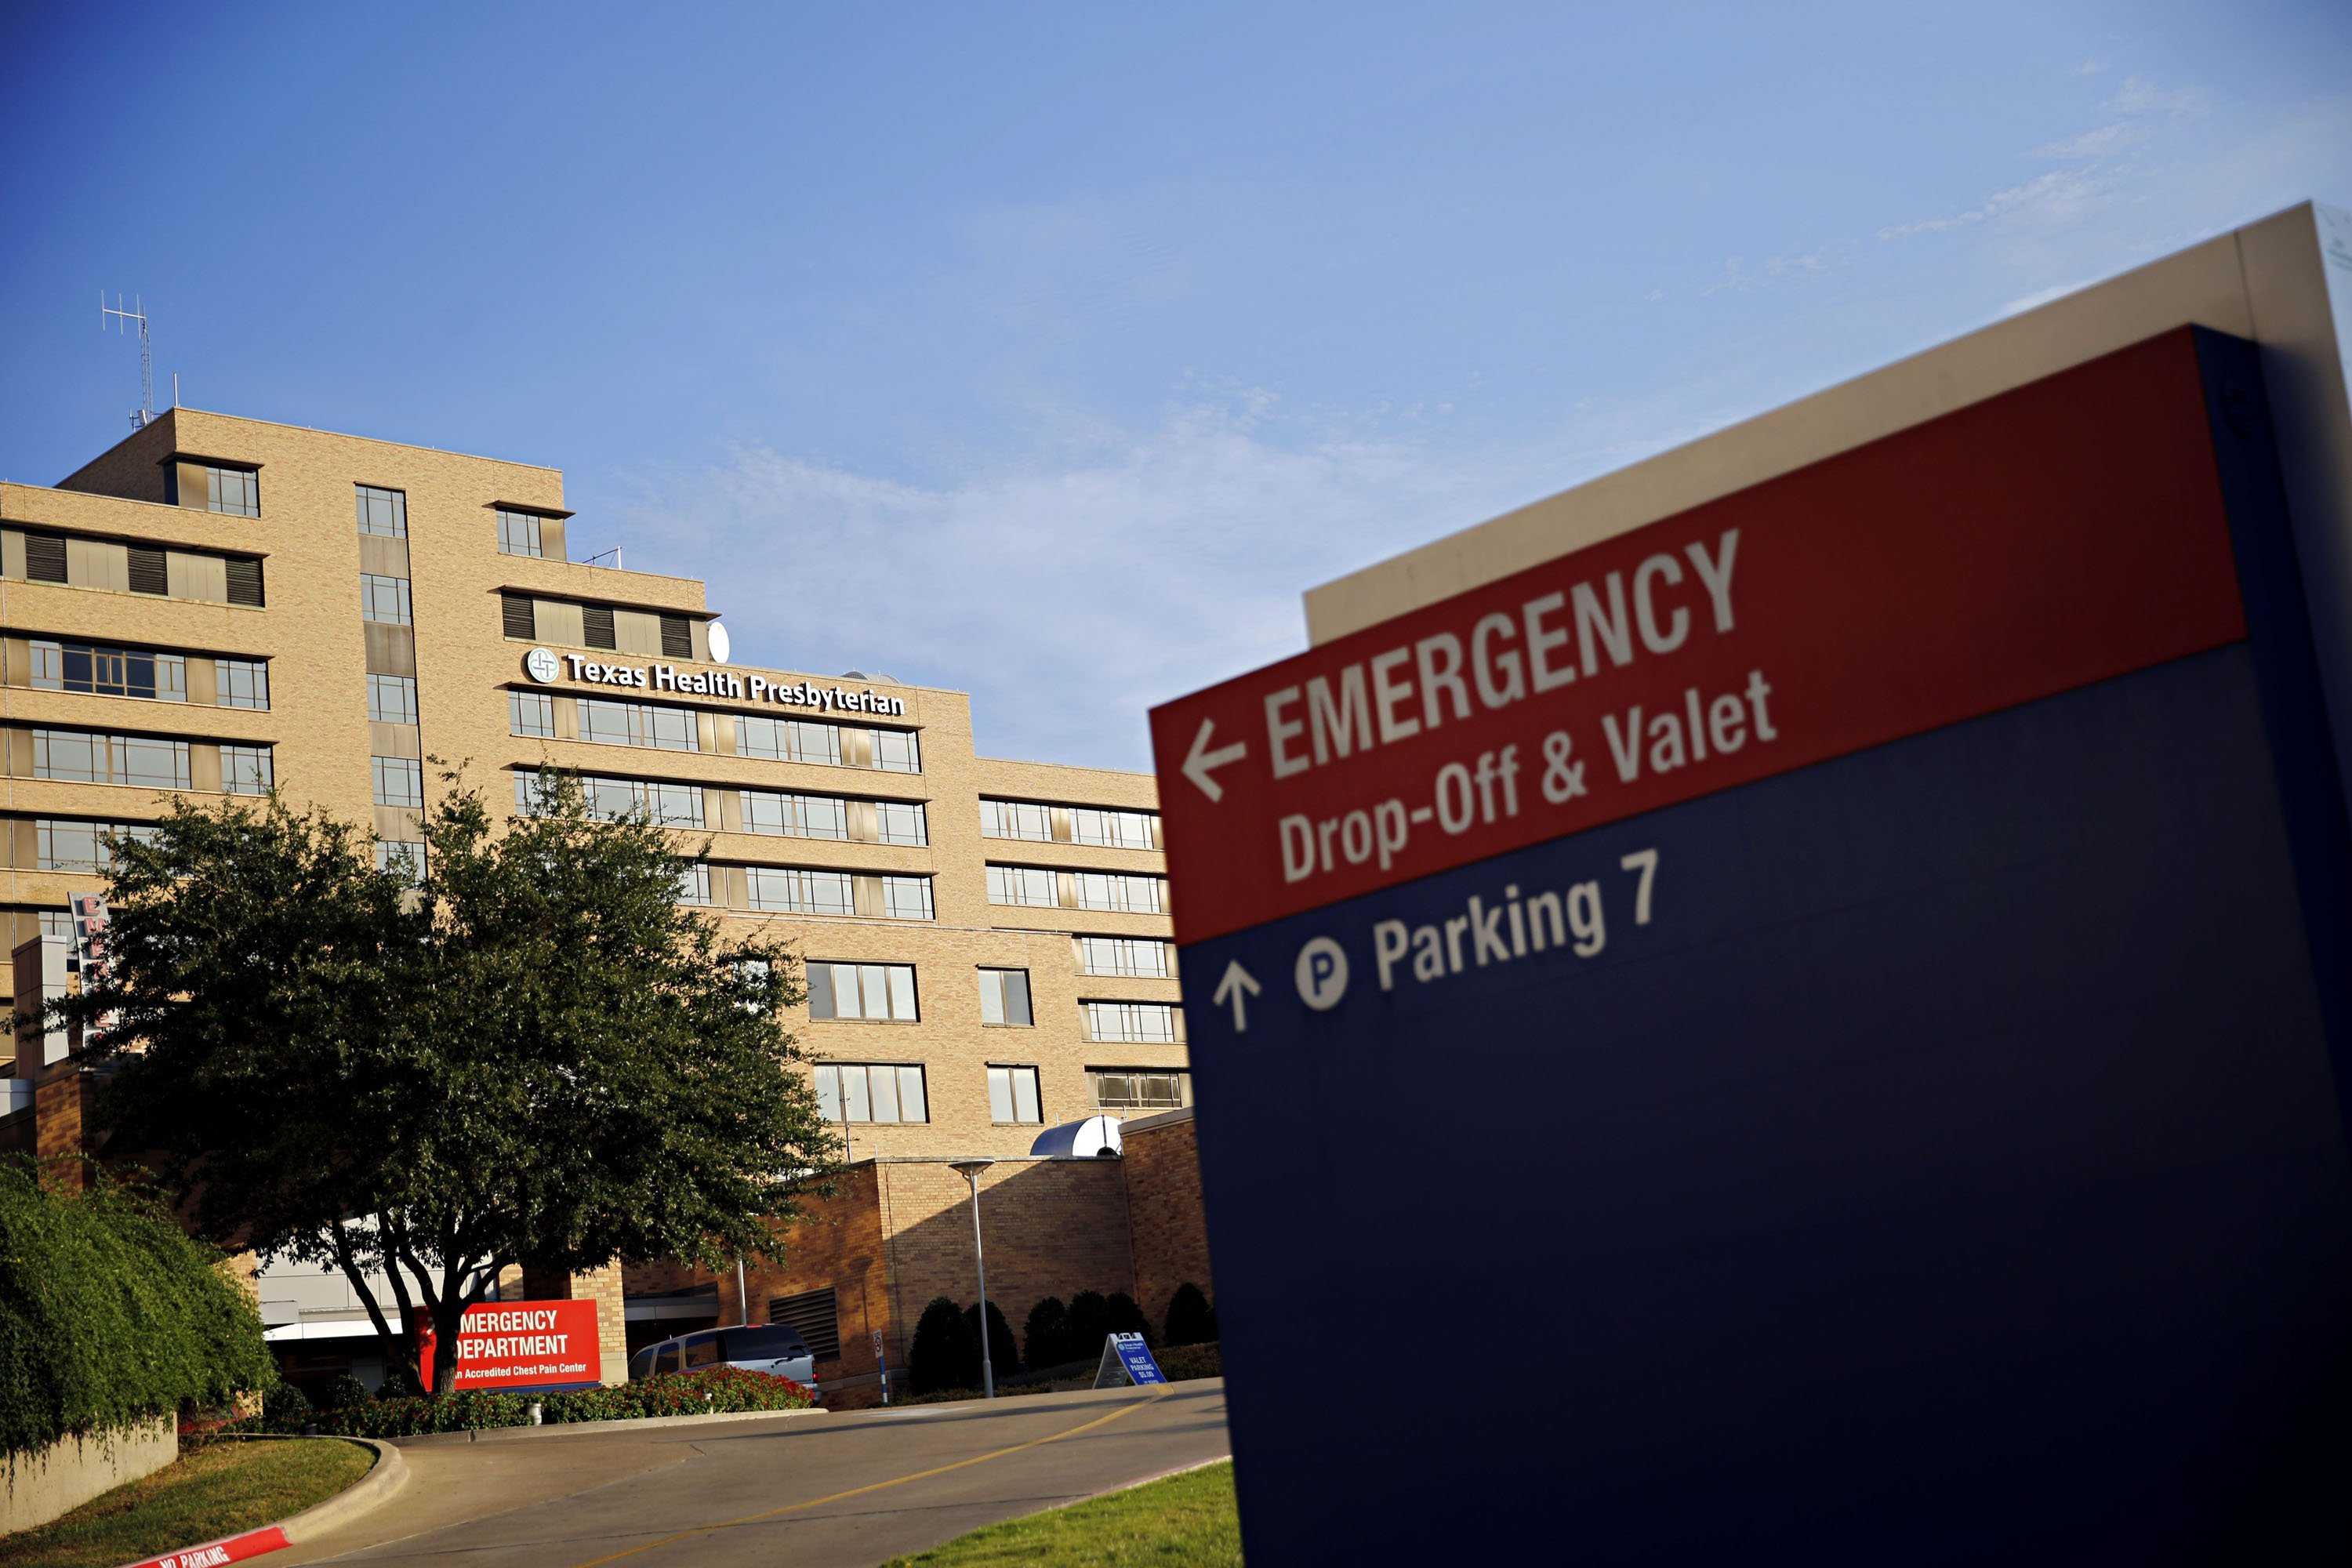 Texas Health Presbyterian hospital on Tuesday, September 30, 2014, in Dallas. A patient at the hospital tested positive for the Ebola virus. (G.J. McCarthy/Dallas Morning News/MCT)